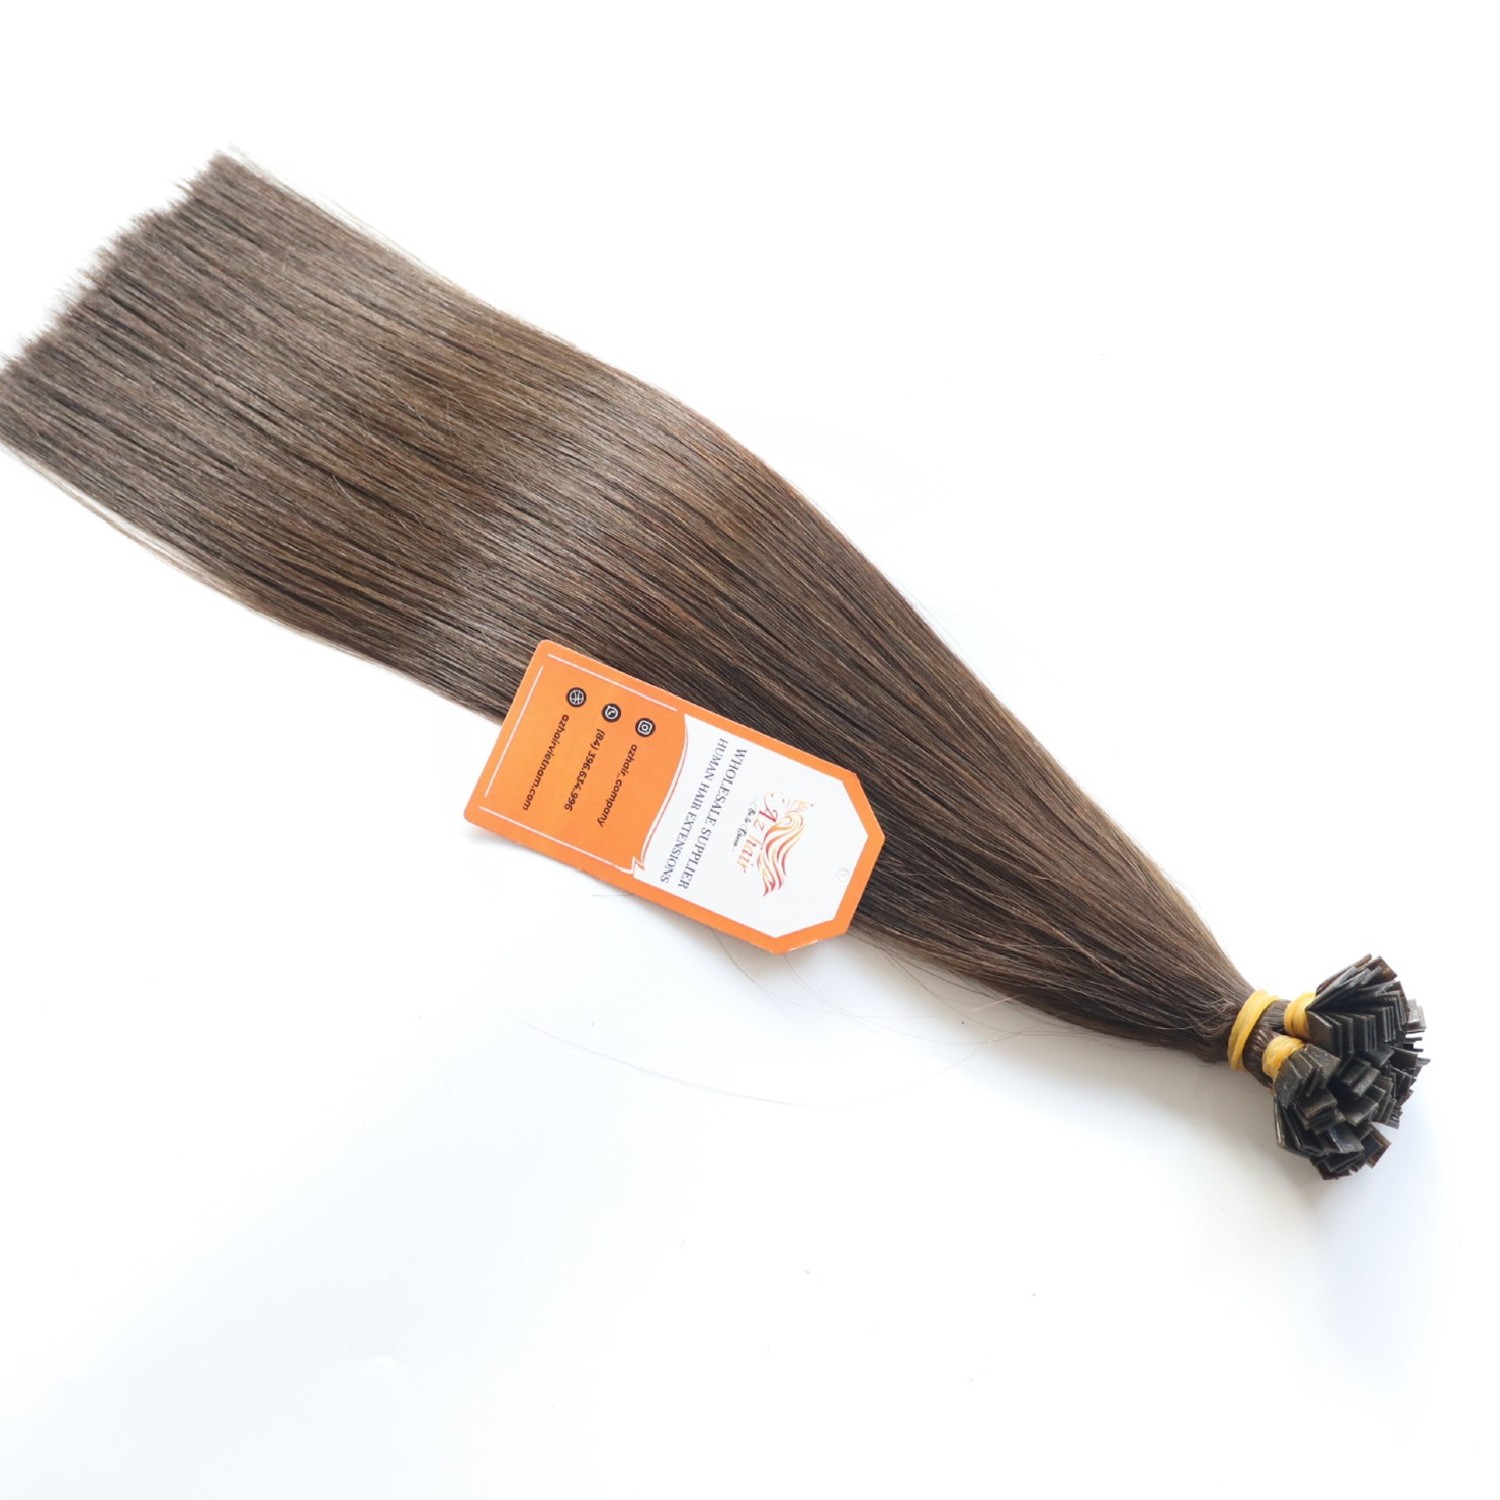 Brown-Color-100%-Human-Hair-Flat-In-Hair-Extensions-Azhaircompany-Wholesale-Price.